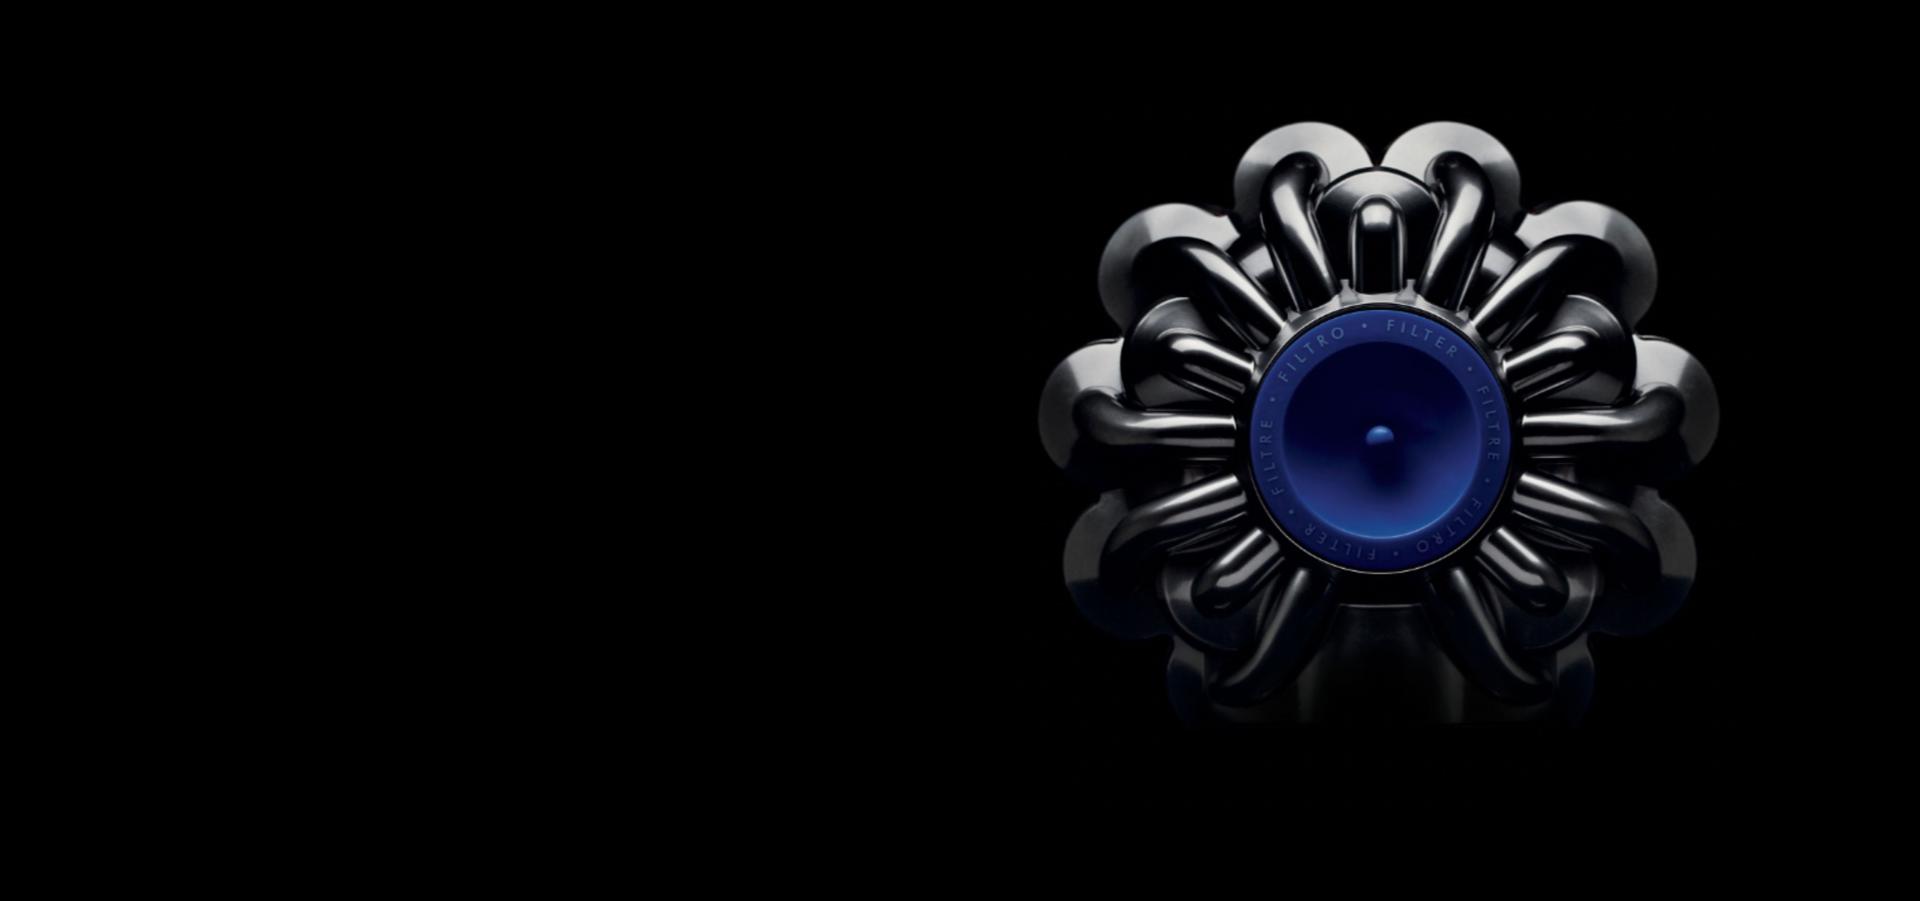 A Dyson cyclone engineered by James Dyson.